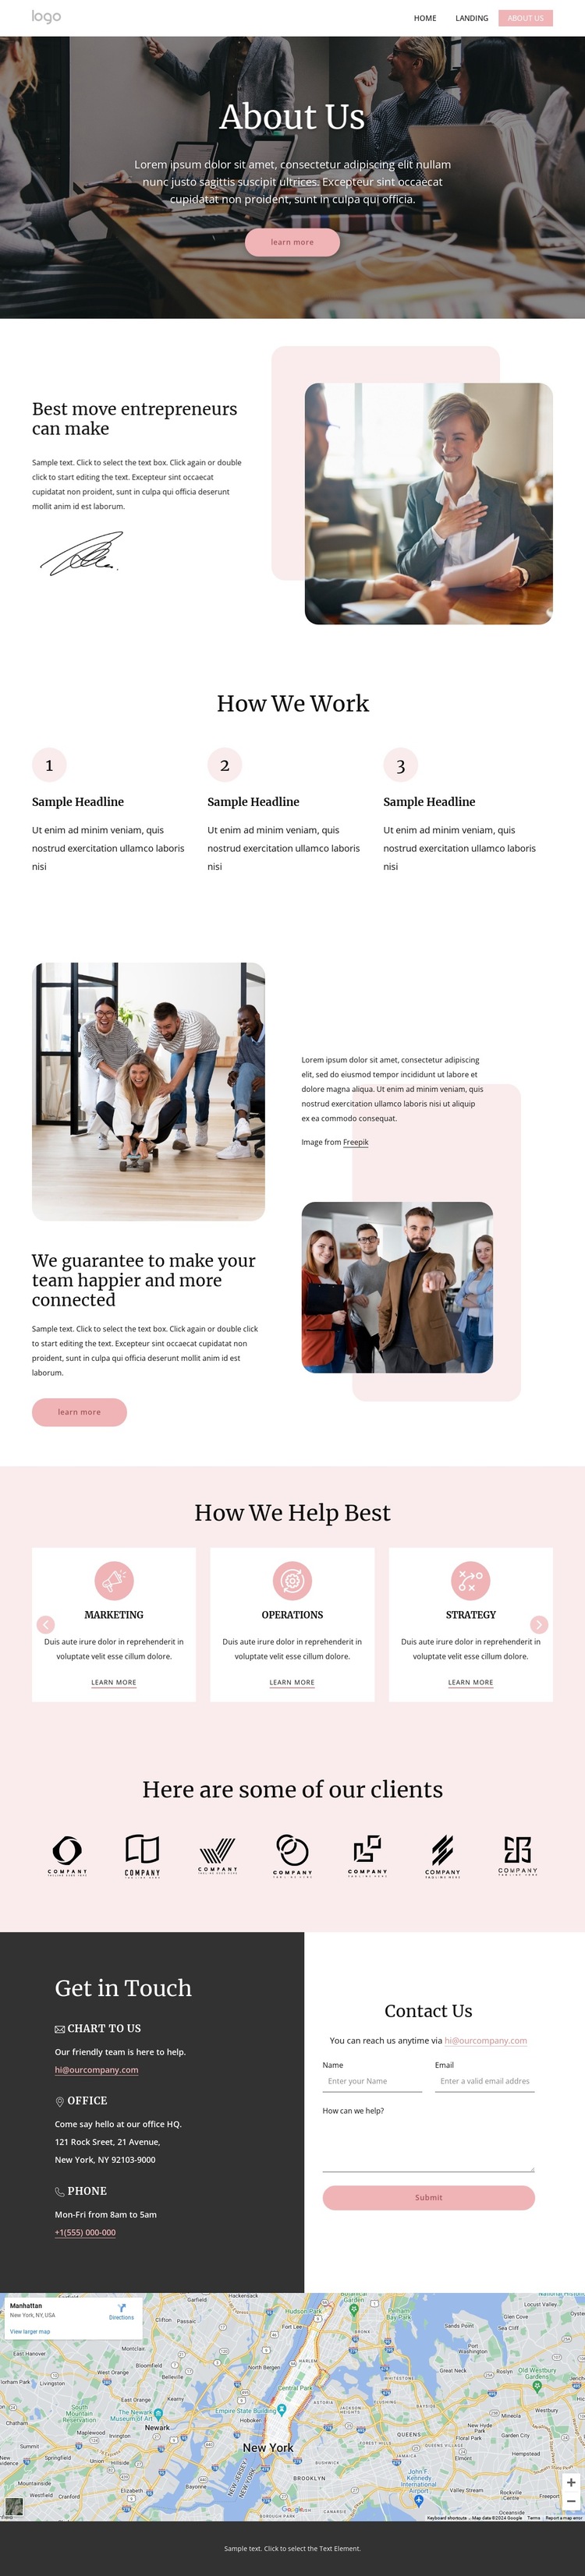 Team building expertise HTML5 Template